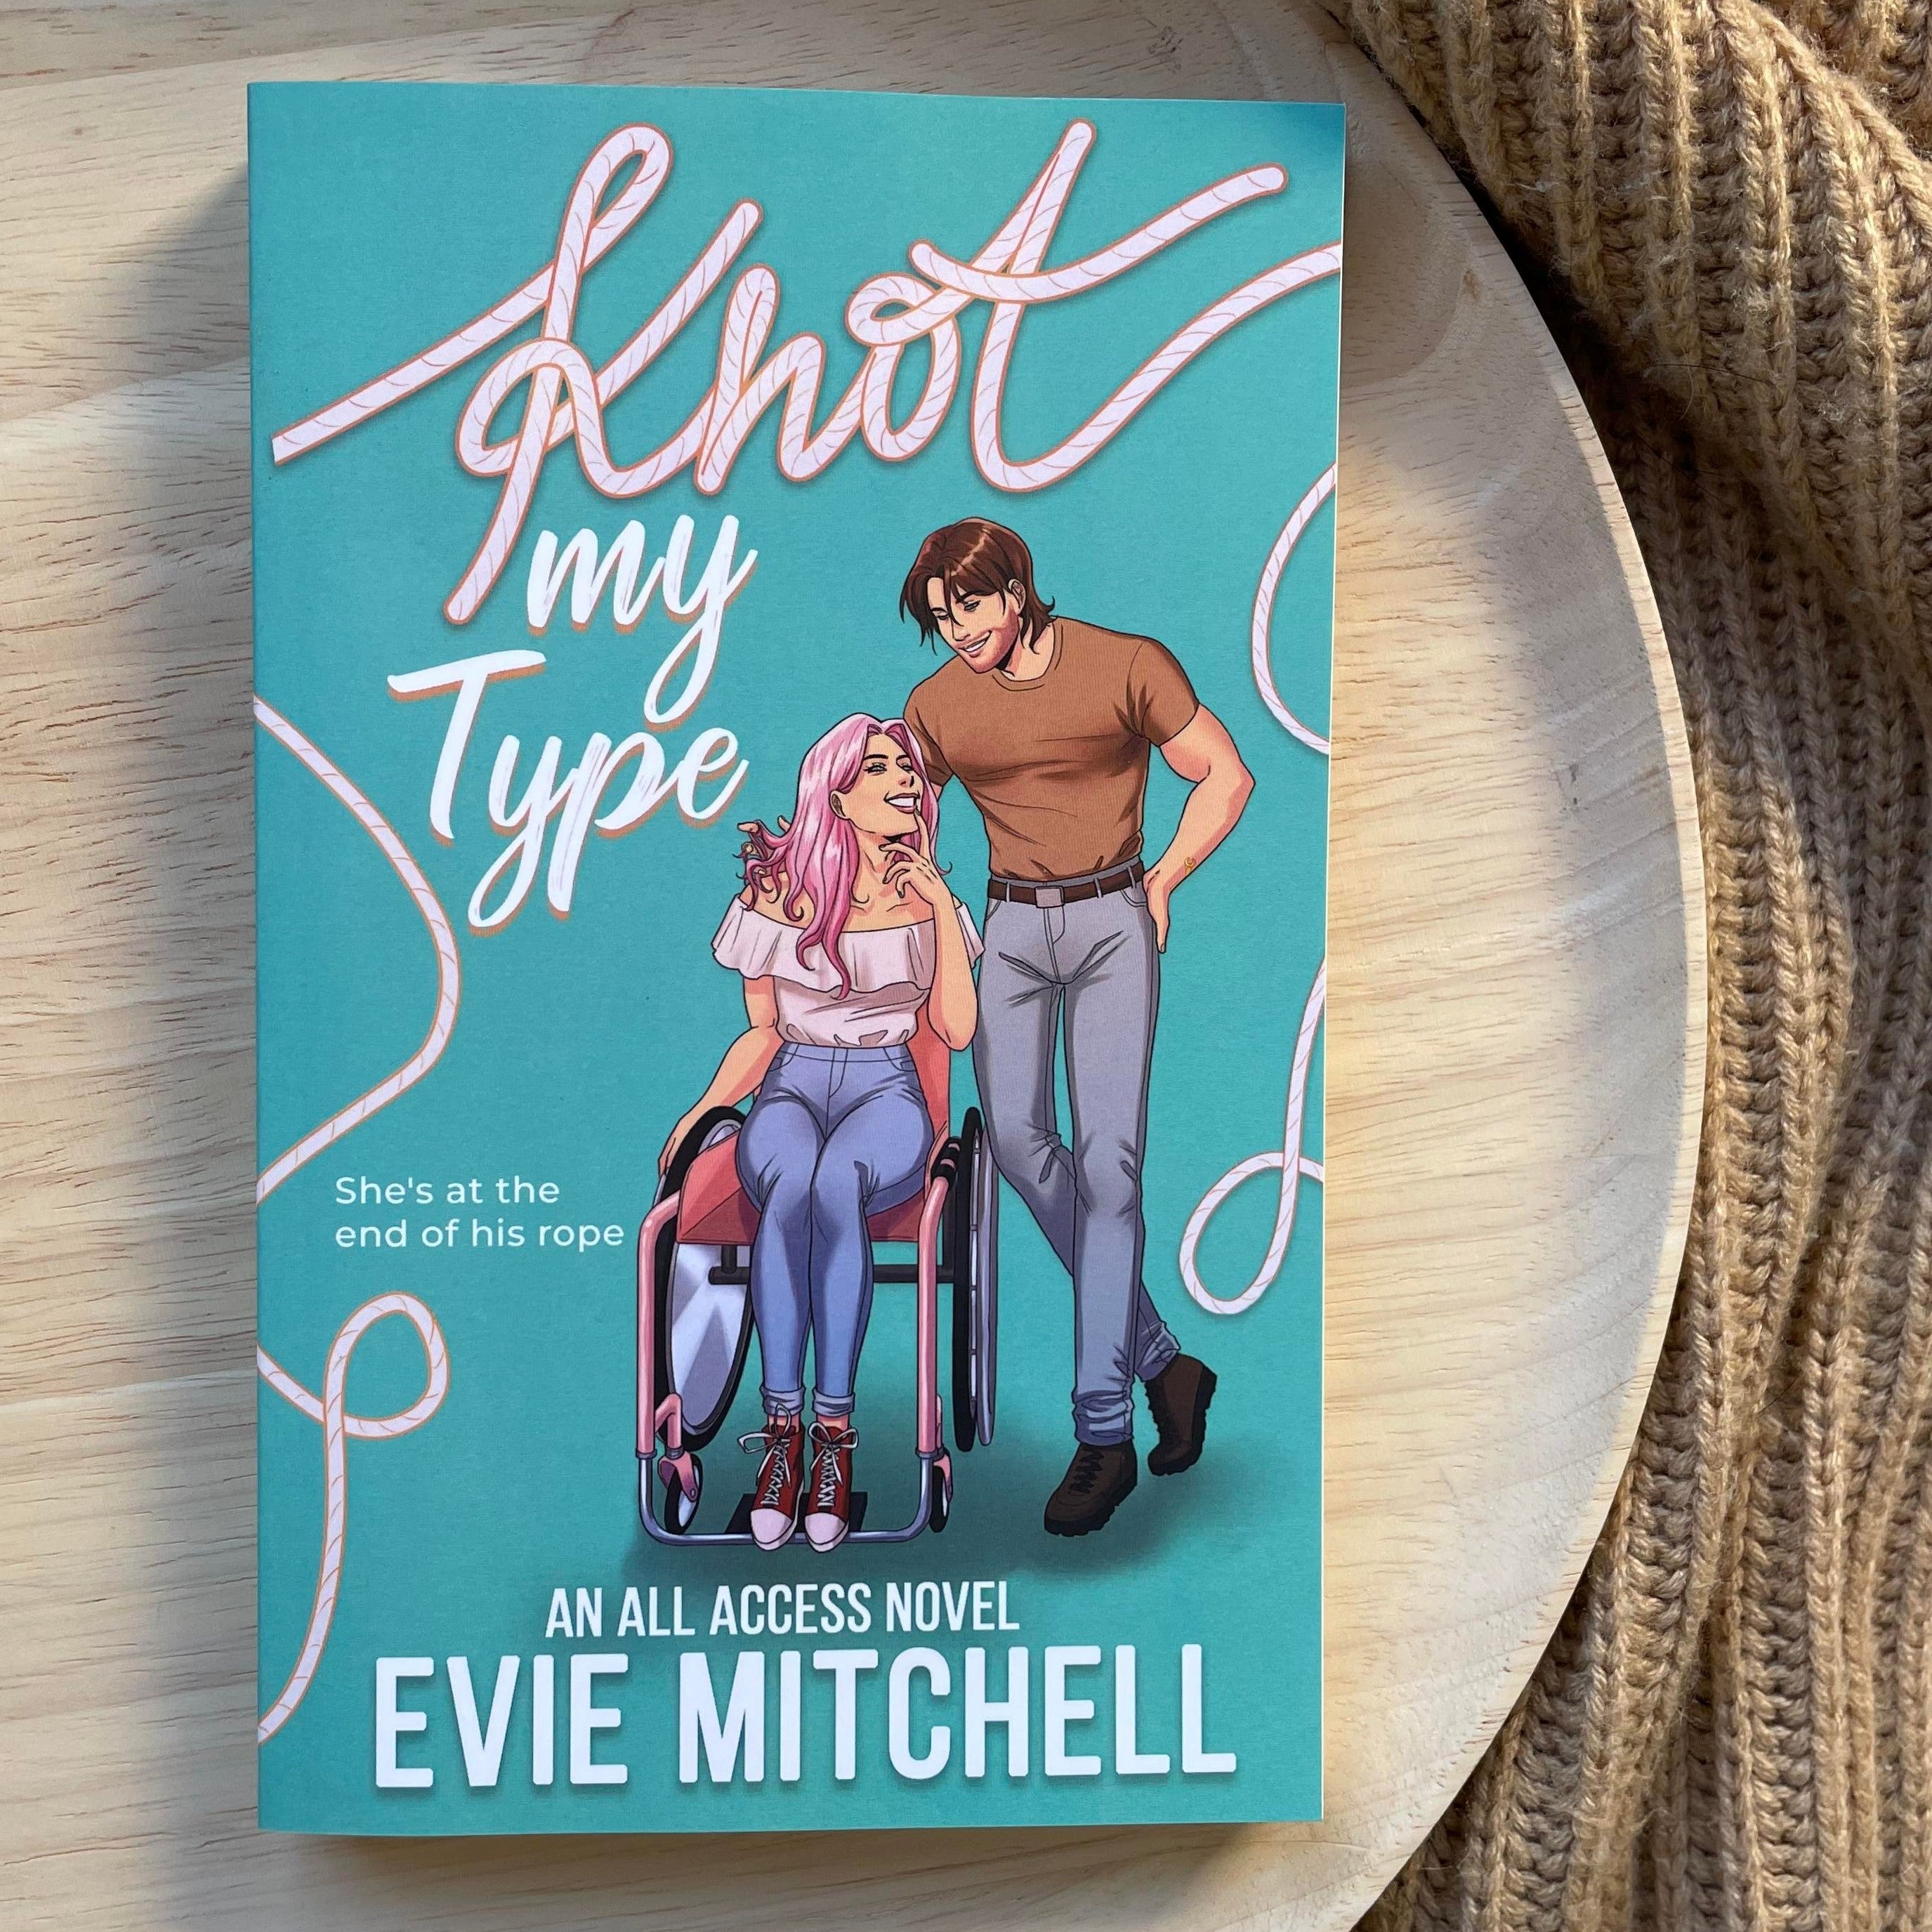 All Access series by Evie Mitchell